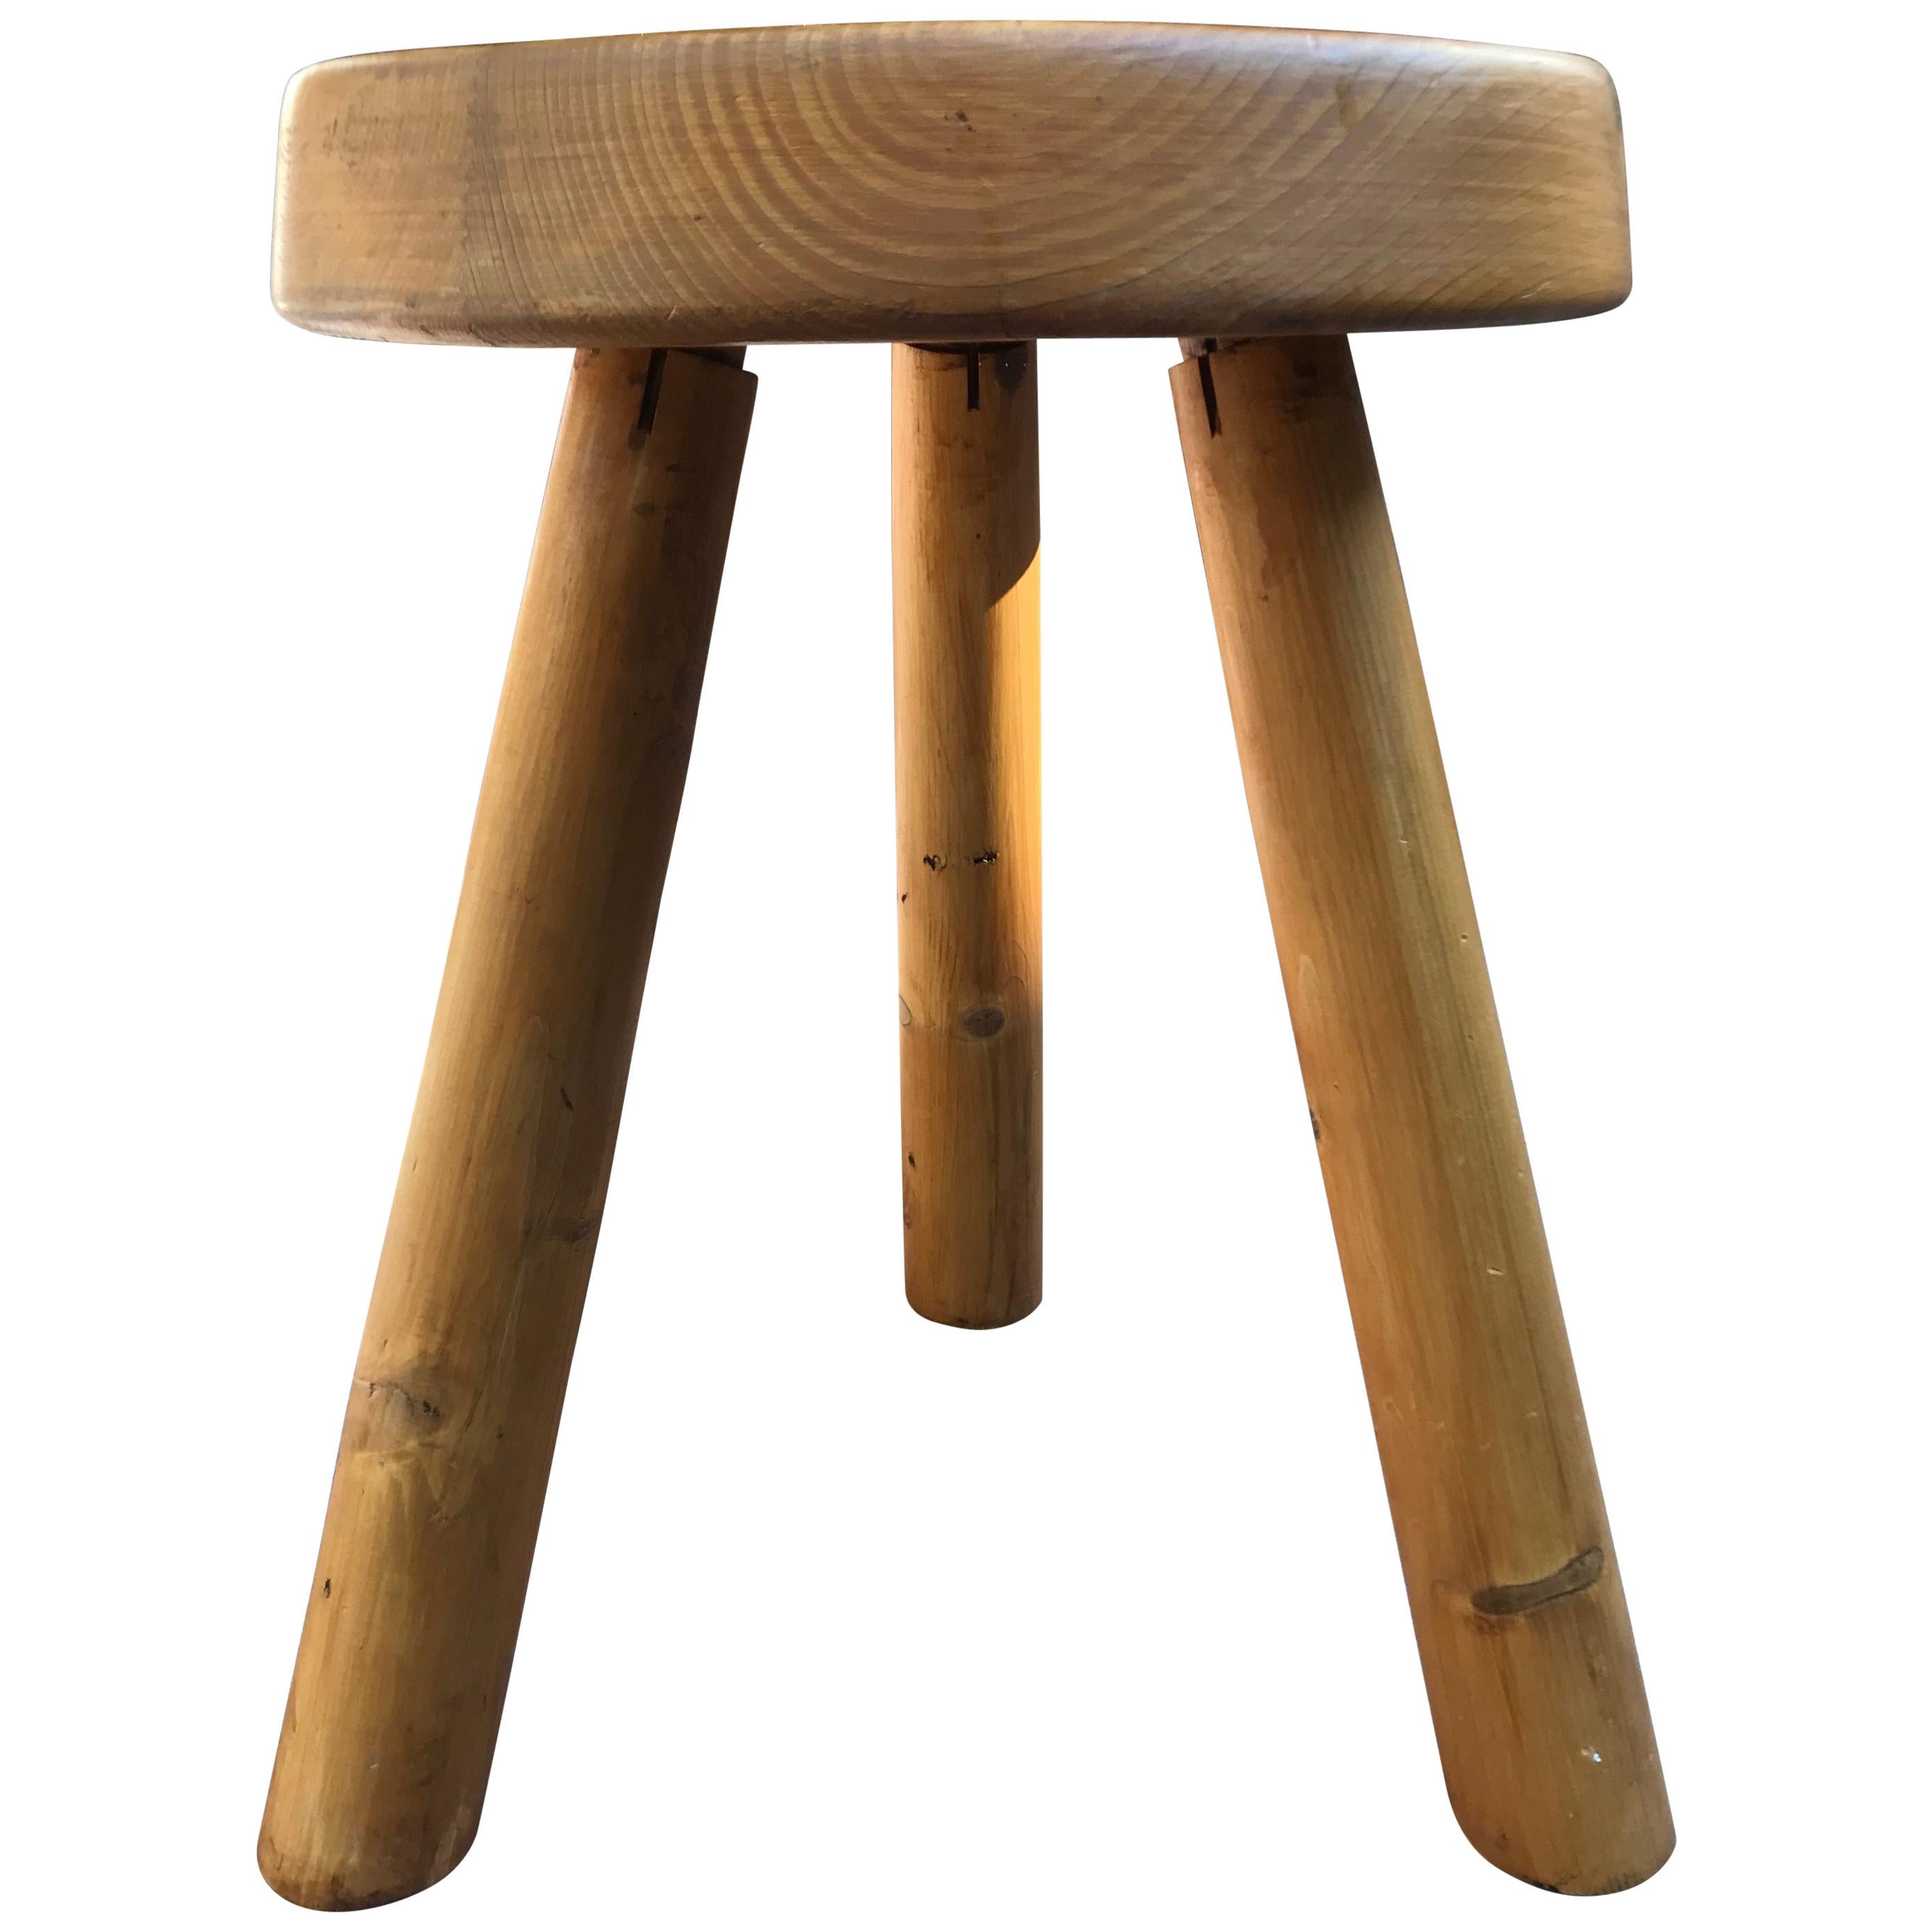 Charlotte Perriand's Stool